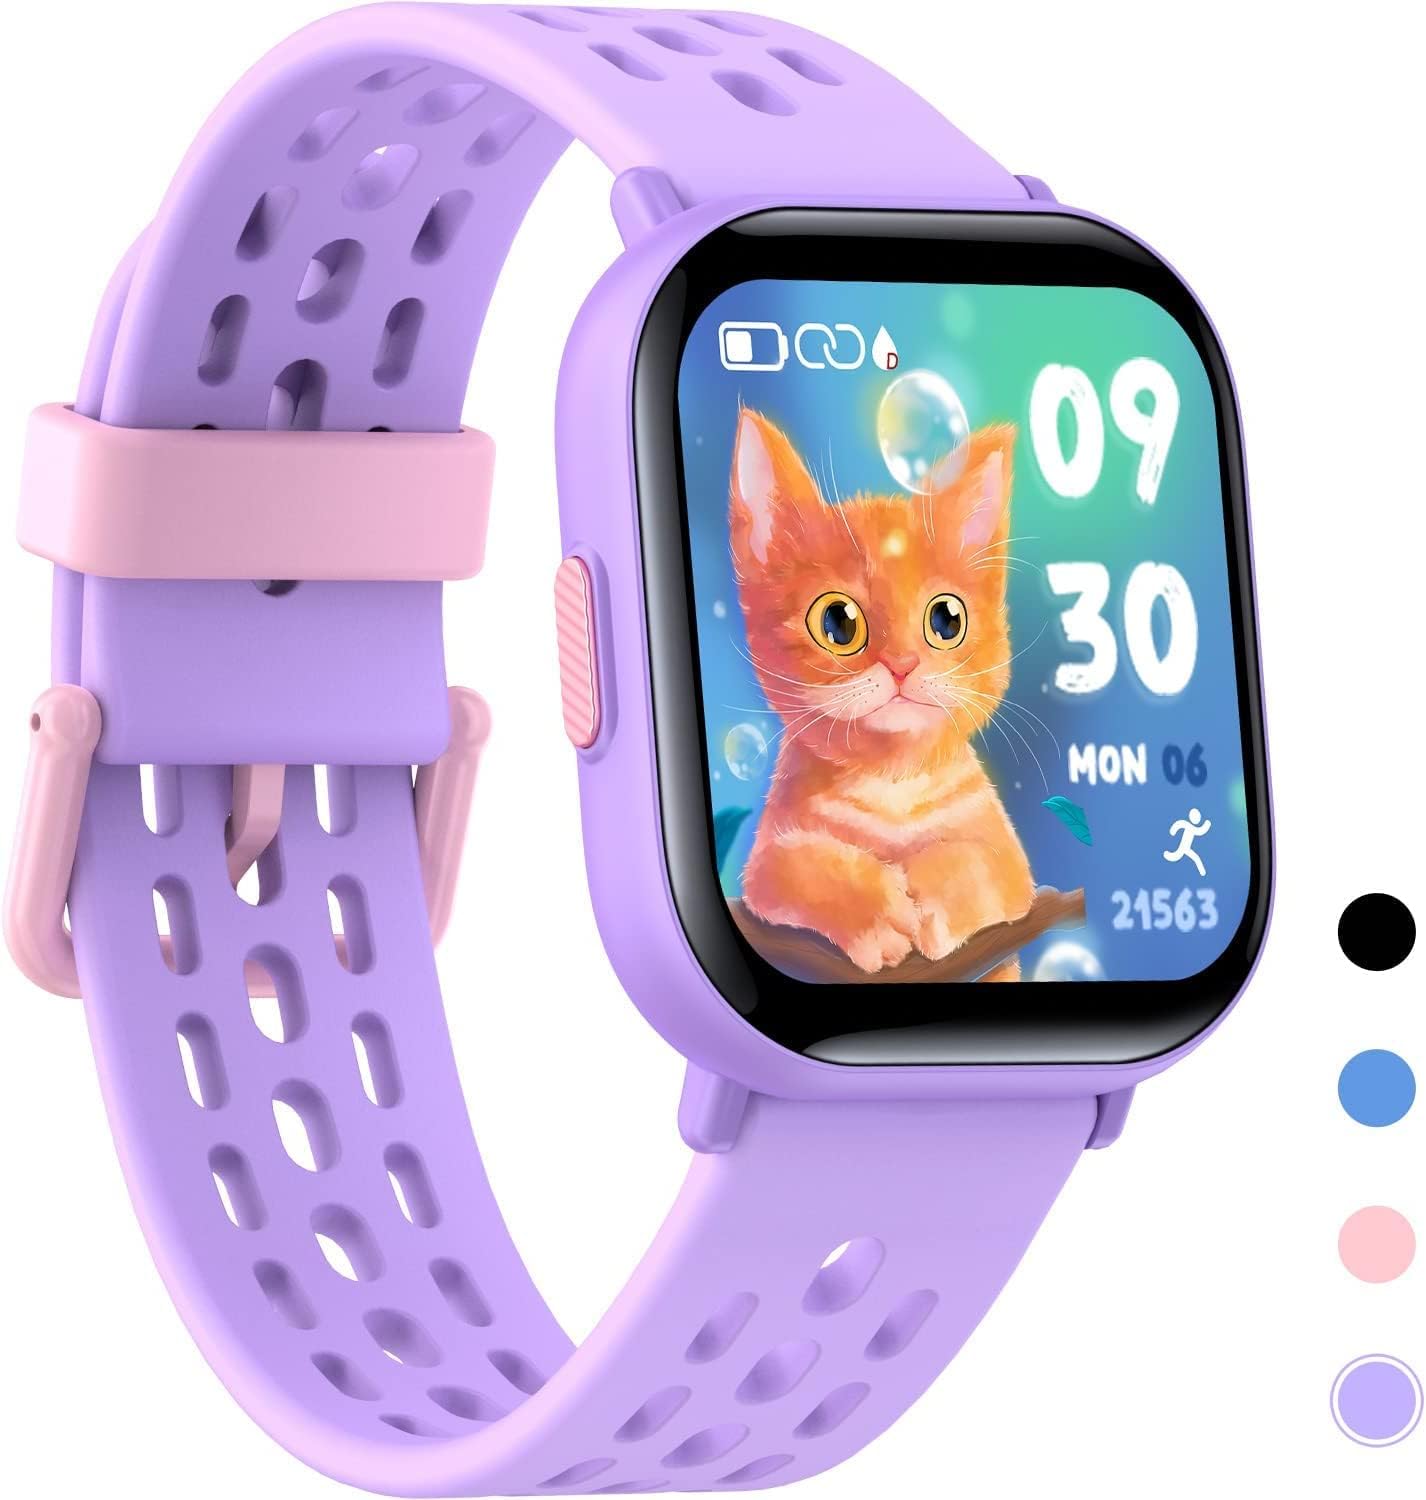 DMG Smart Watch for Kids, 1.54" Kids Fitness Activity Tracker Watch, IP68 Waterproof, Heart Rate Sleep Monitor, 8 Sport Modes, Pedometers, Calories Counter, Alarm Clock,Gifts for Teens 6+(Purple)